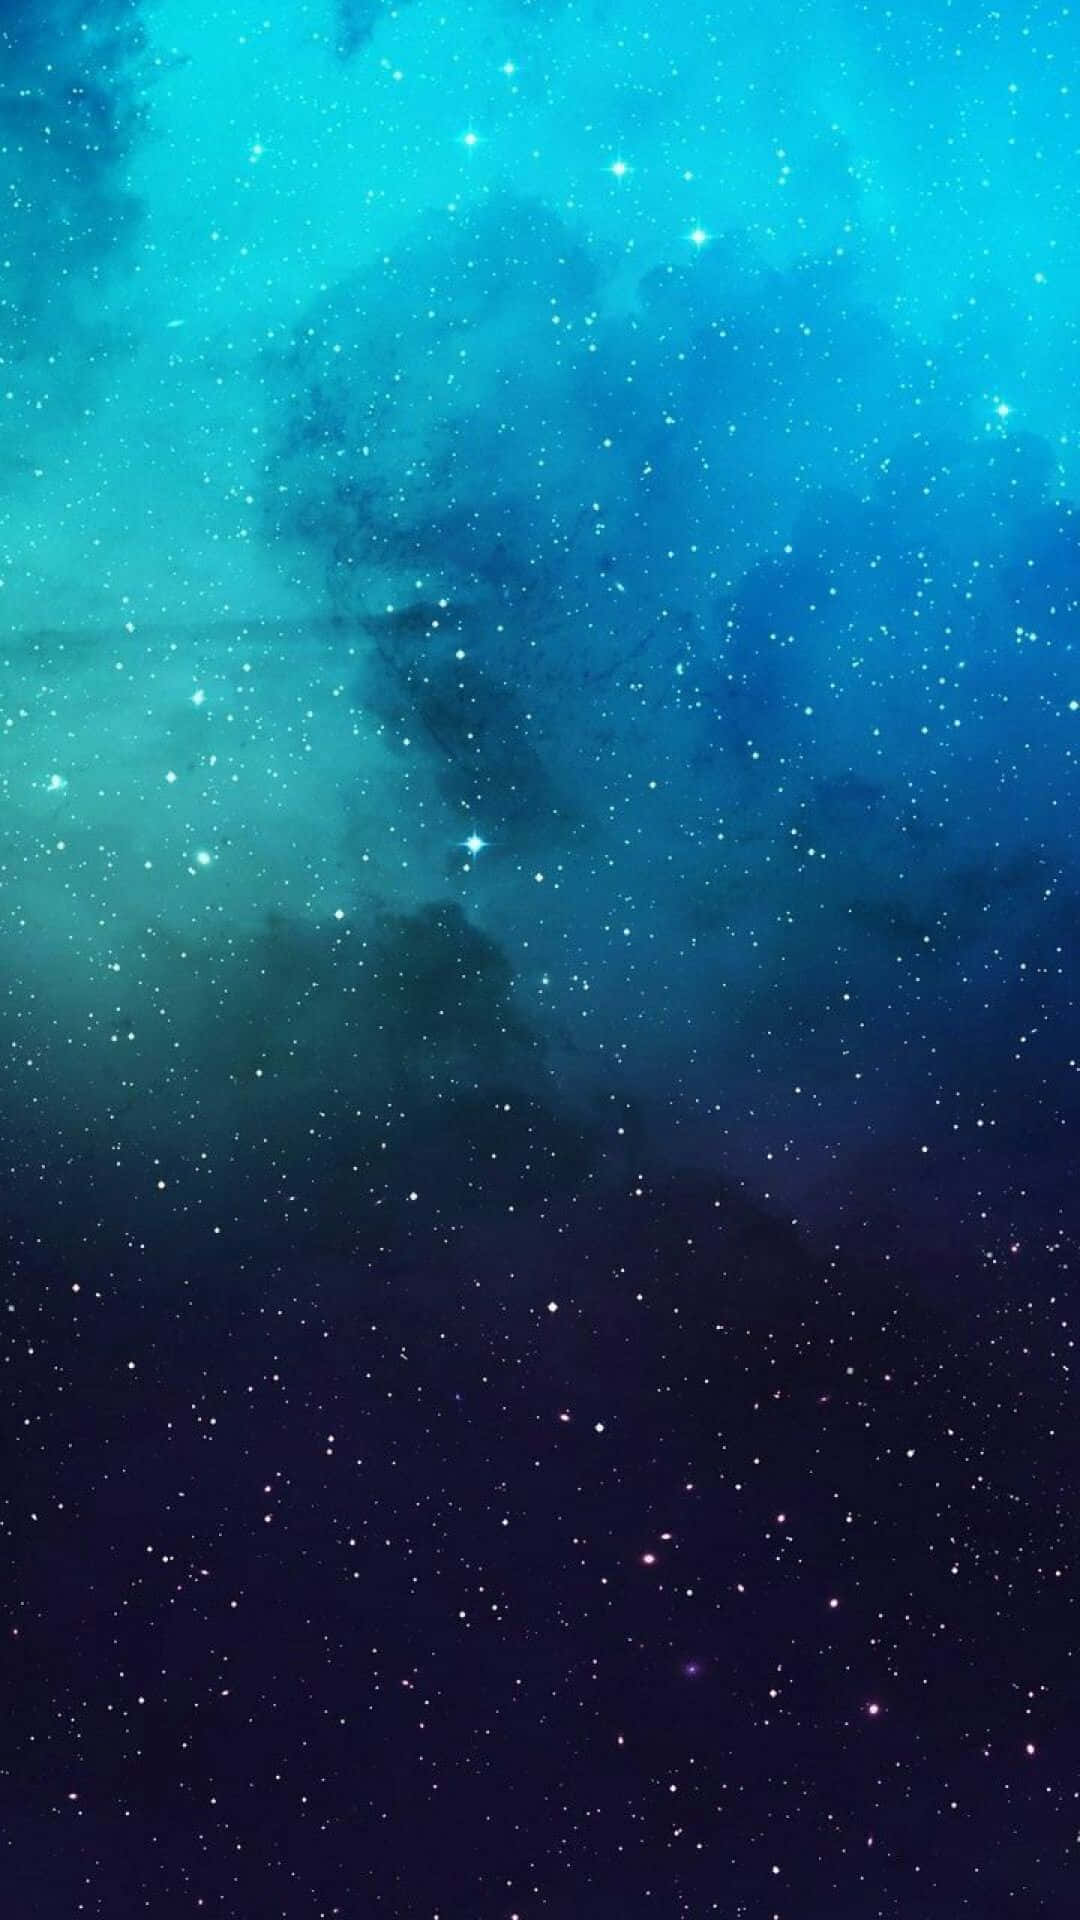 Download wallpapers 1080x1920 space, stars, nebula, iPhone 6, iPhone 6s, iPhone 6 plus, iPhone 7, iPhone 7 Plus, iPhone 8, iPhone 8 Plus, iPhone X, XS, XS Max, XR, iOS 11, iOS 12, iPad Pro from a. - Cyan